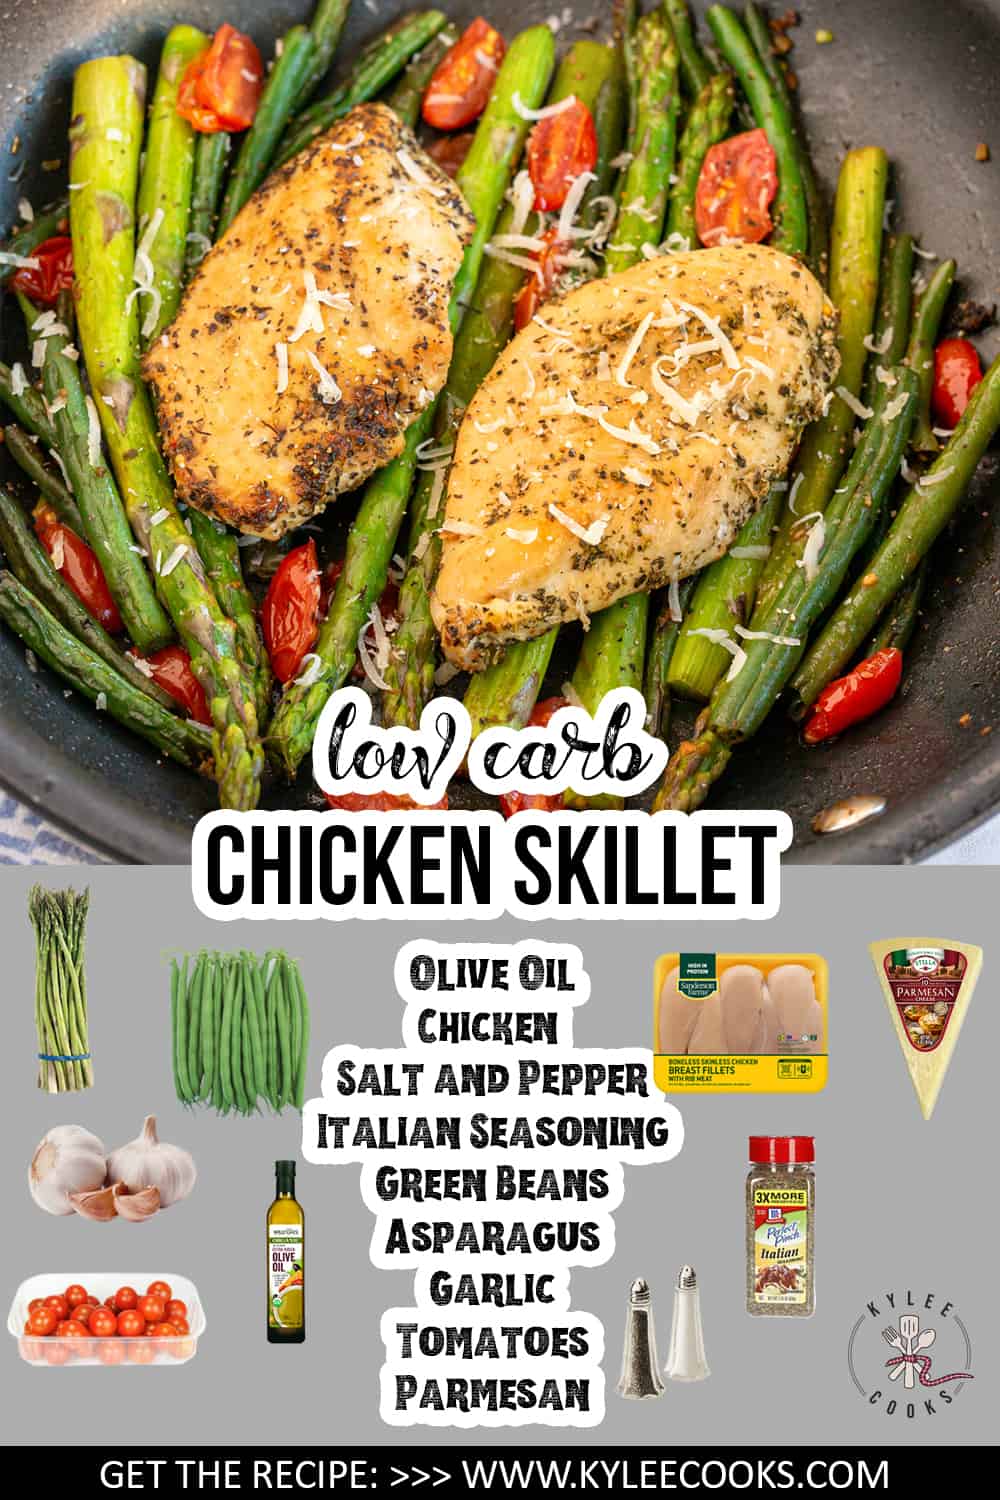 chicken in a skillet and on a plate with "one skillet chicken dinner" and recipe ingredients overlaid in text.